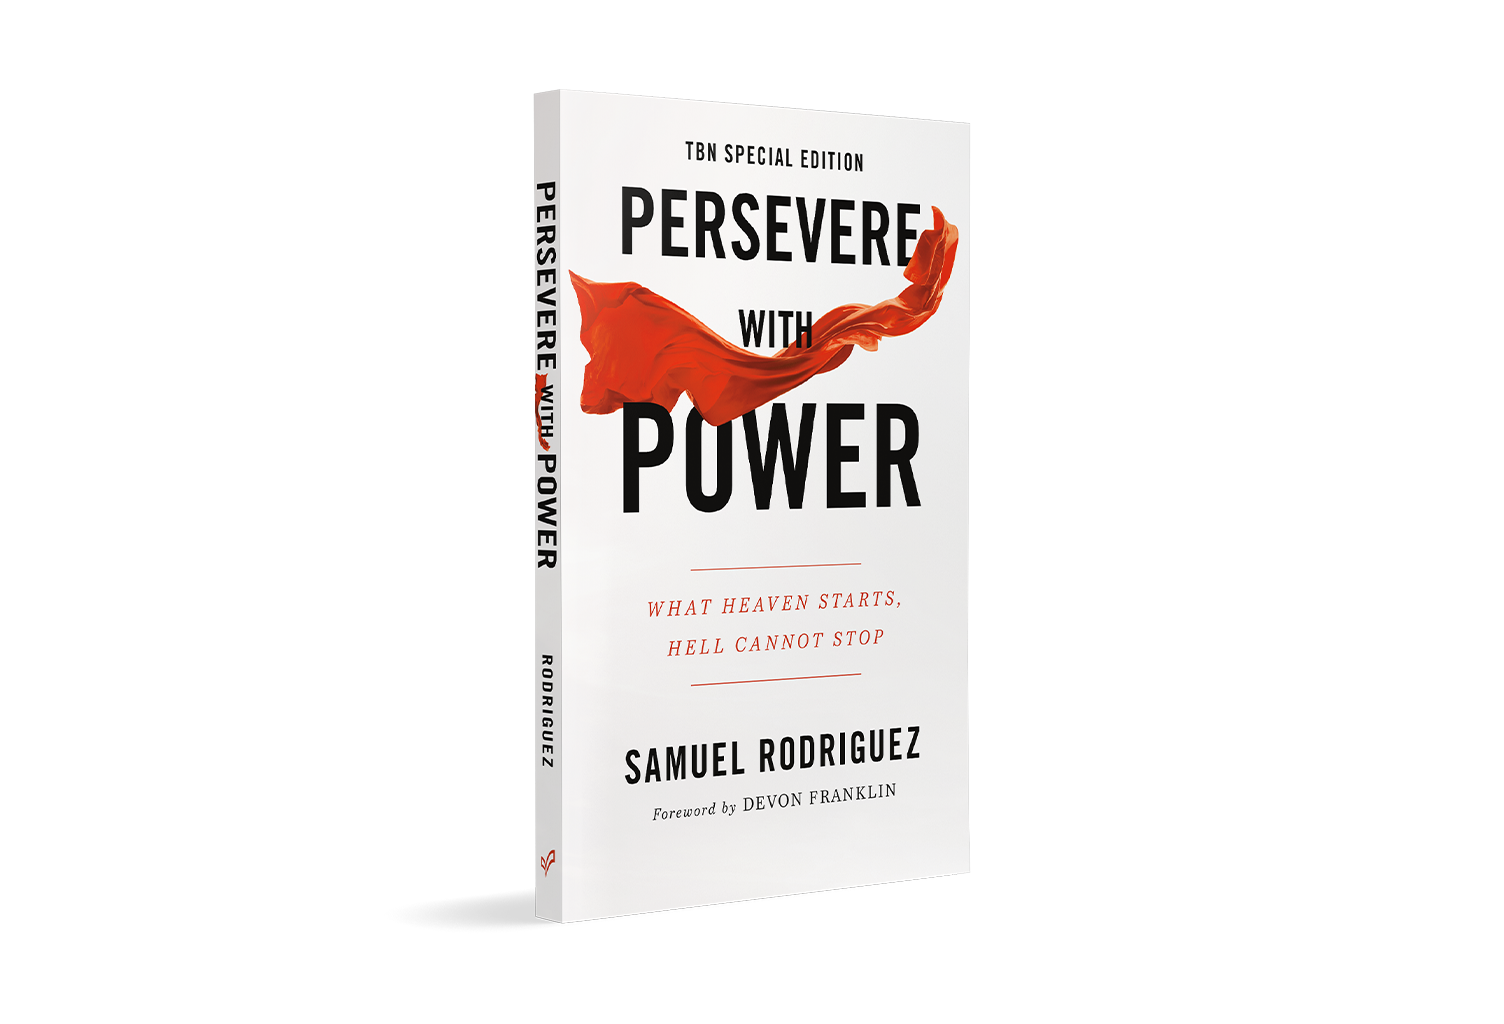 /Persevere%20With%20Power%2C%20by%20Samuel%20Rodriguez%20on%20TBN